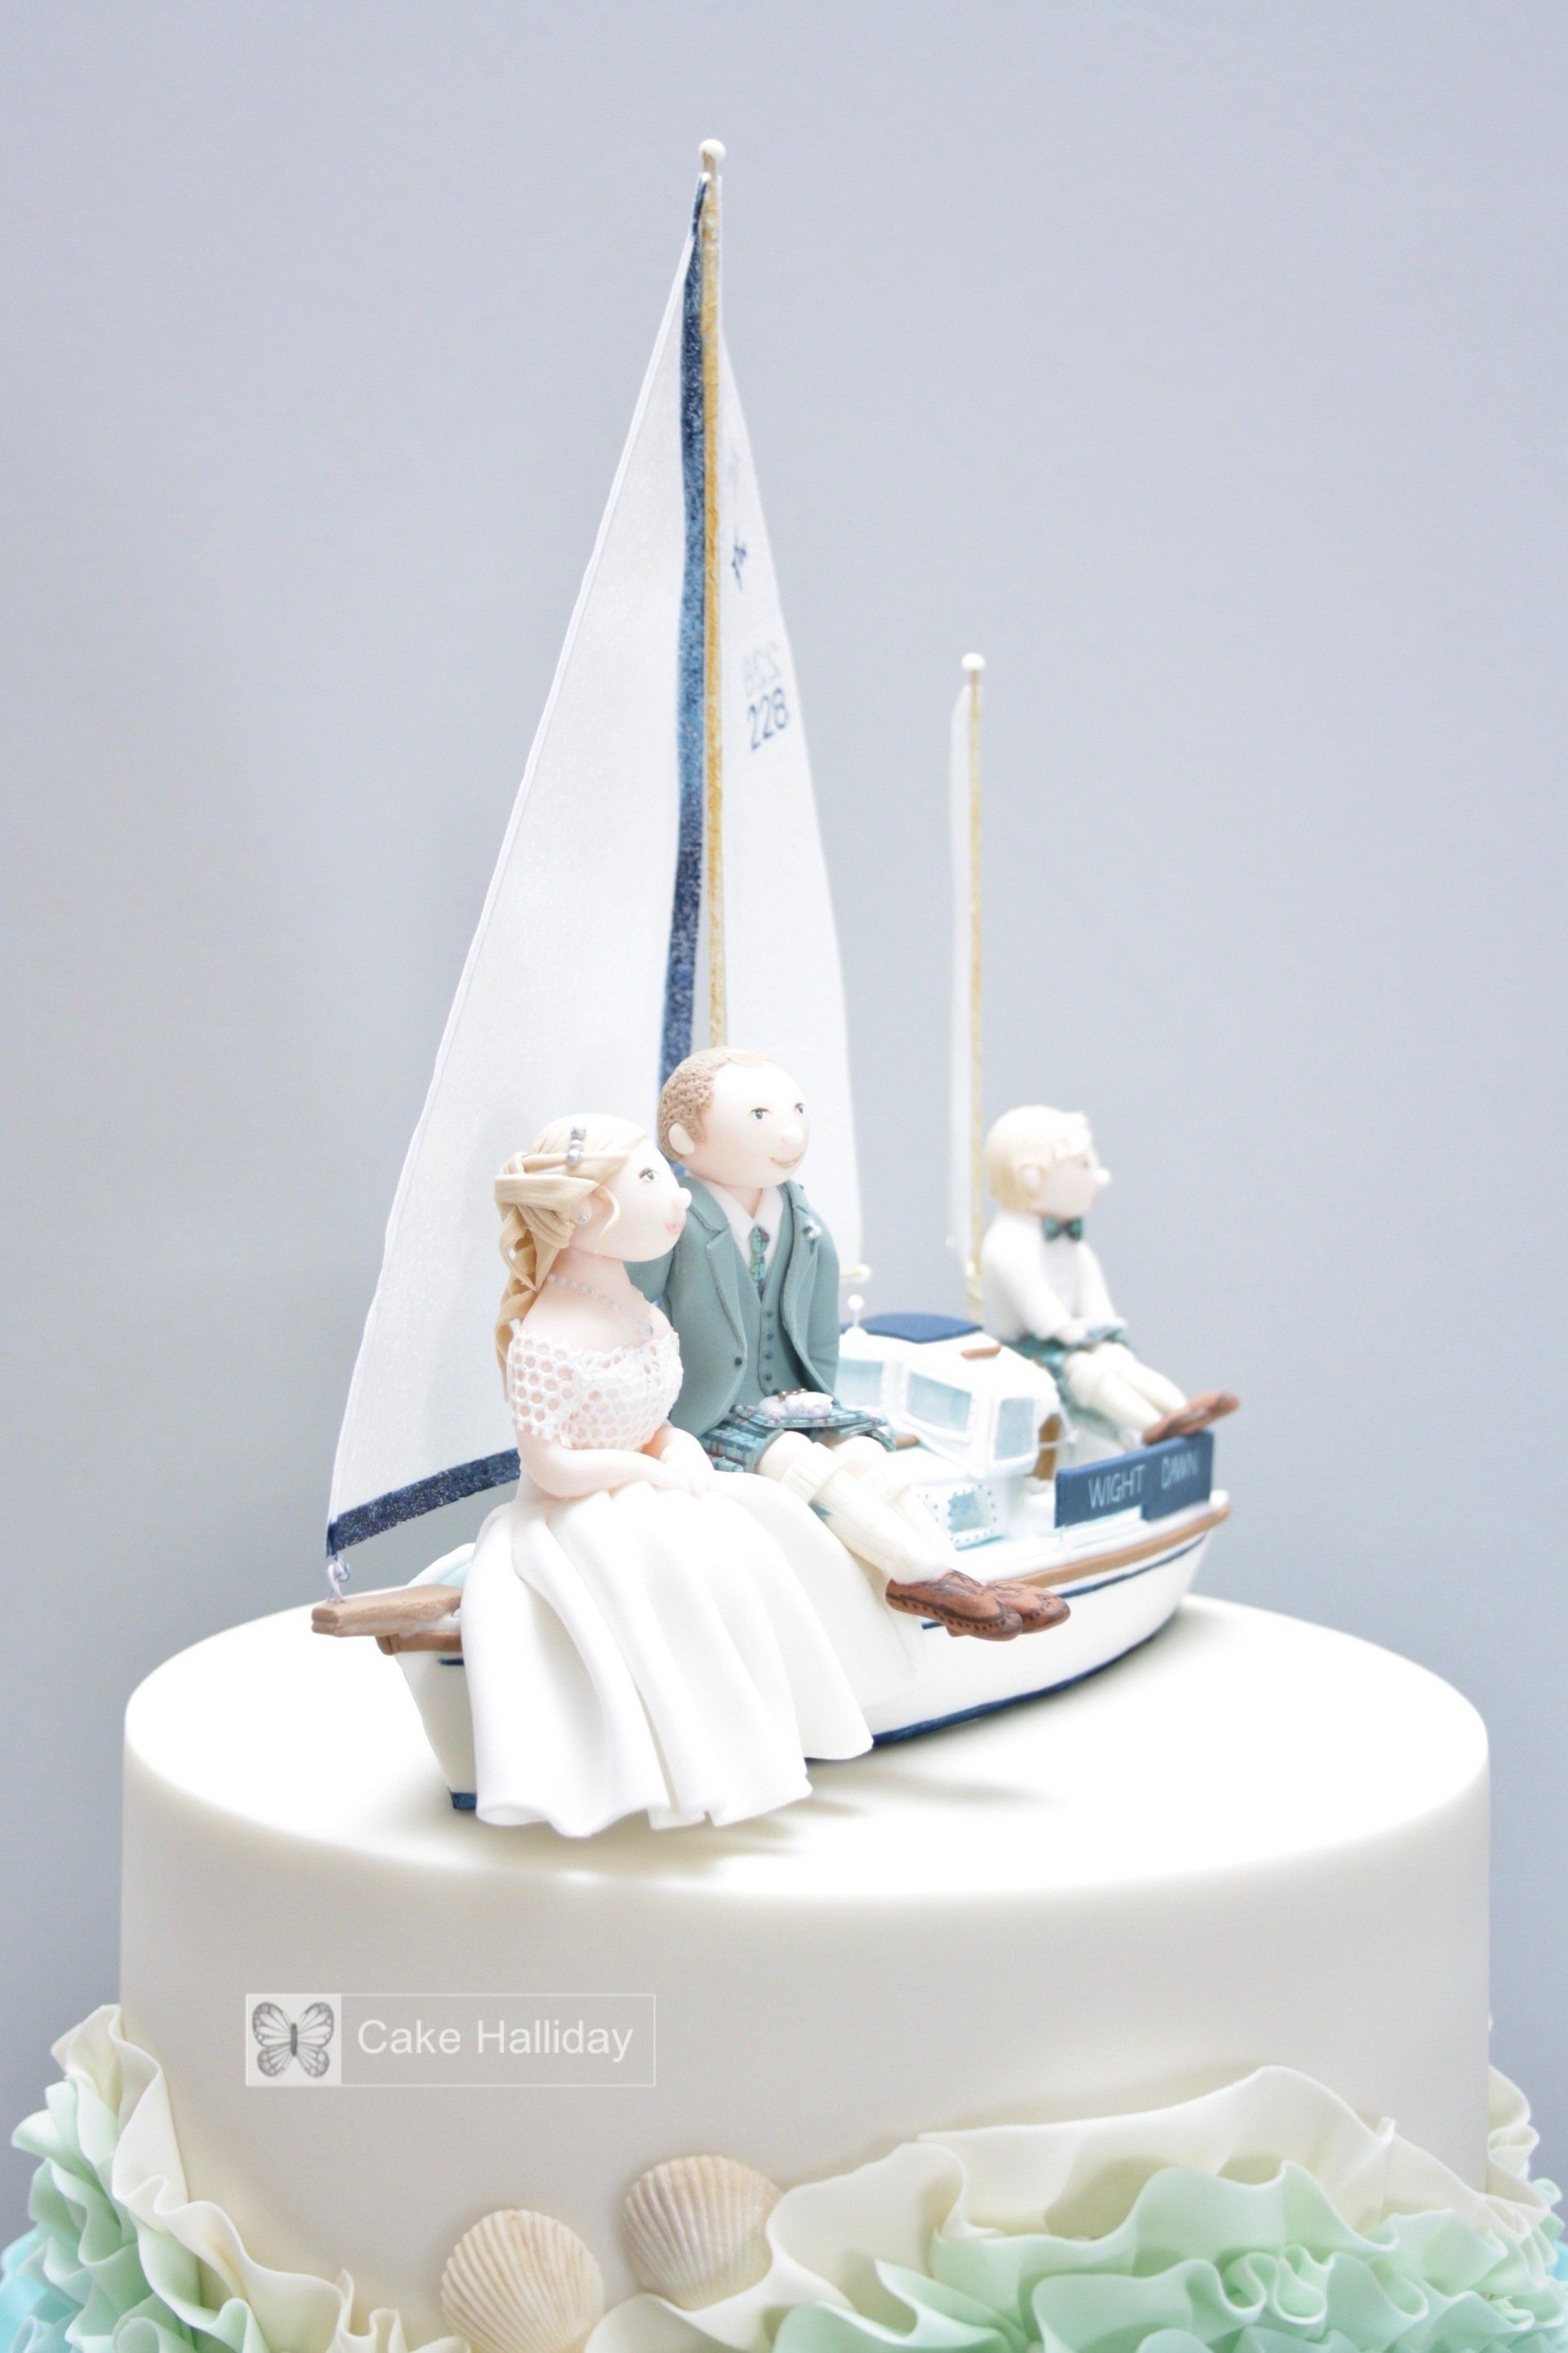 Wedding cake with Westerly Renown (ketch) boat topper and Scottish bride/groom figures by Caroline Halliday